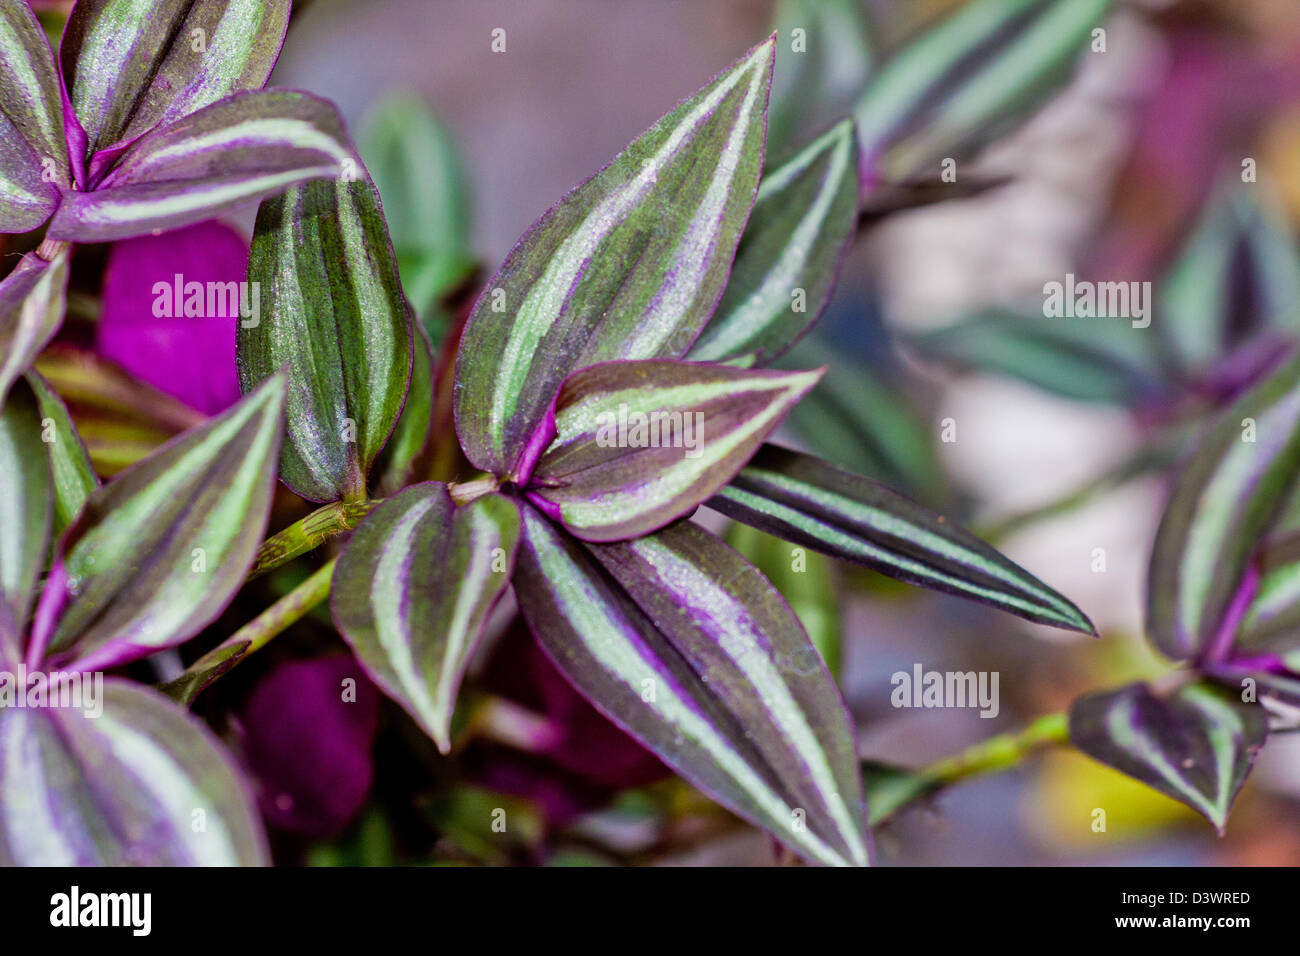 Wandering jew plant. Tradescantia zebrina. Green, purple and silver leaves. Stock Photo